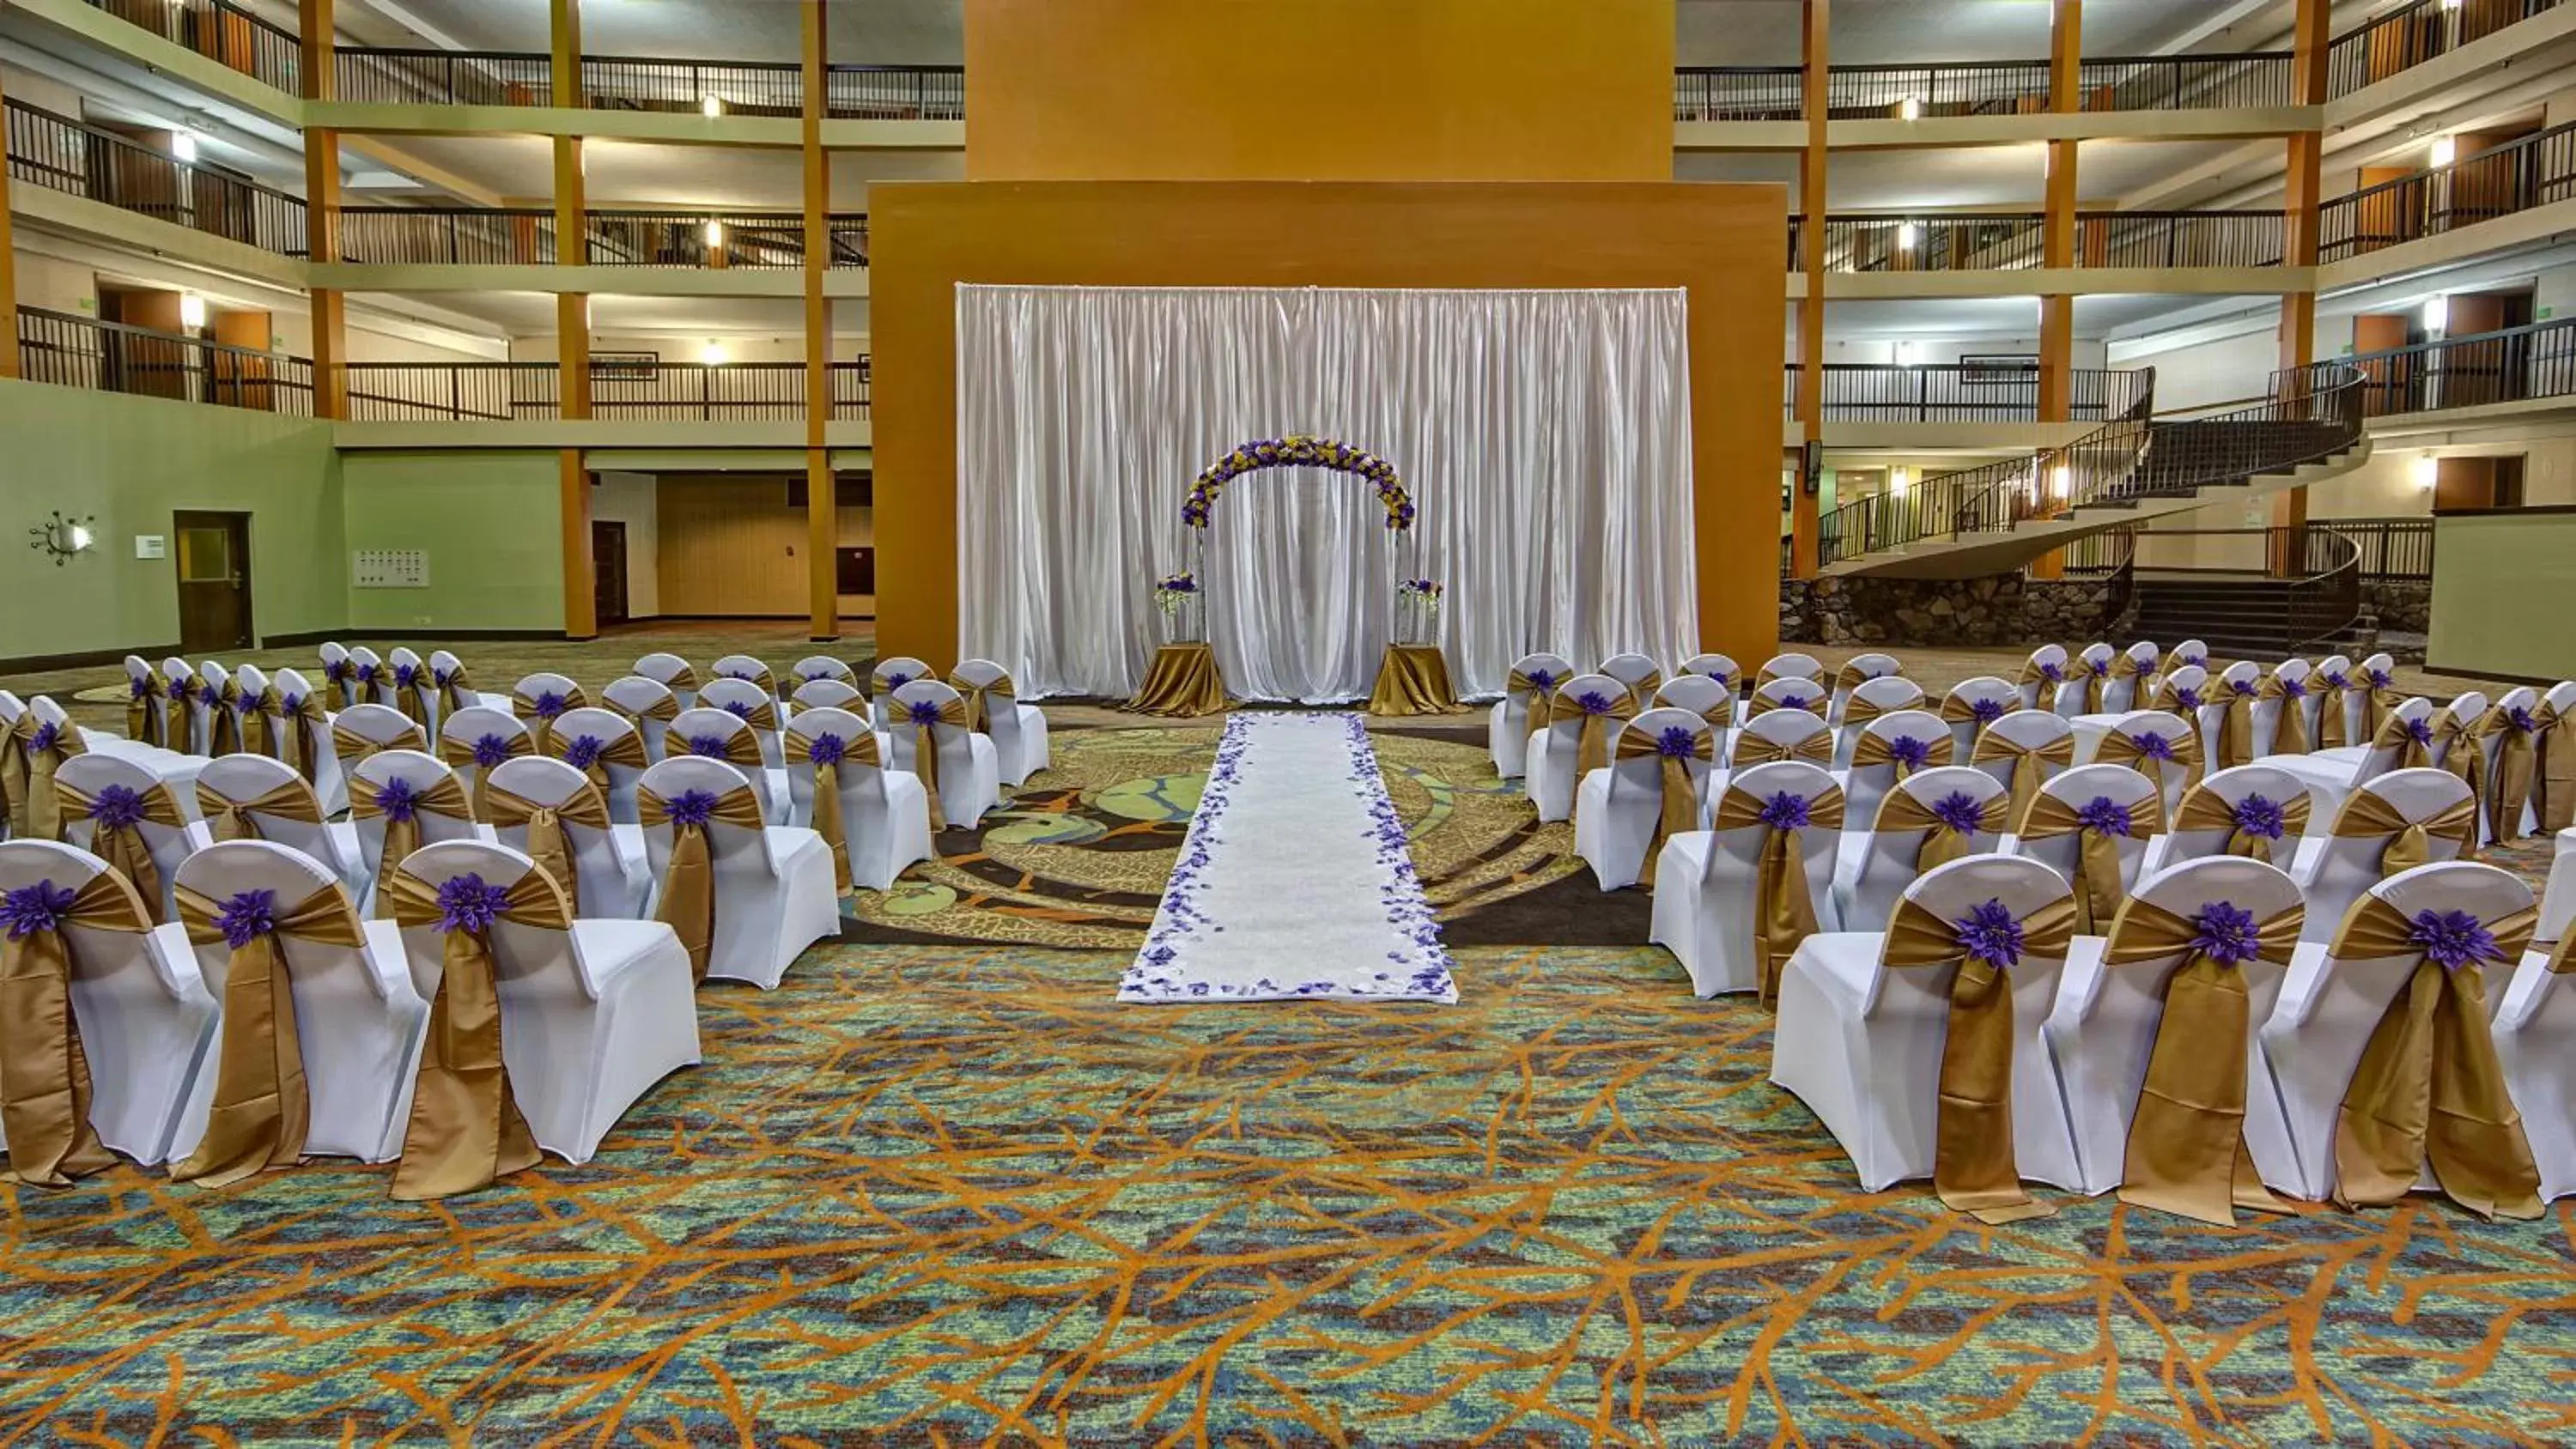 Banquet/Function facilities, Banquet Facilities in Clarion Hotel & Suites Conference Center Memphis Airport